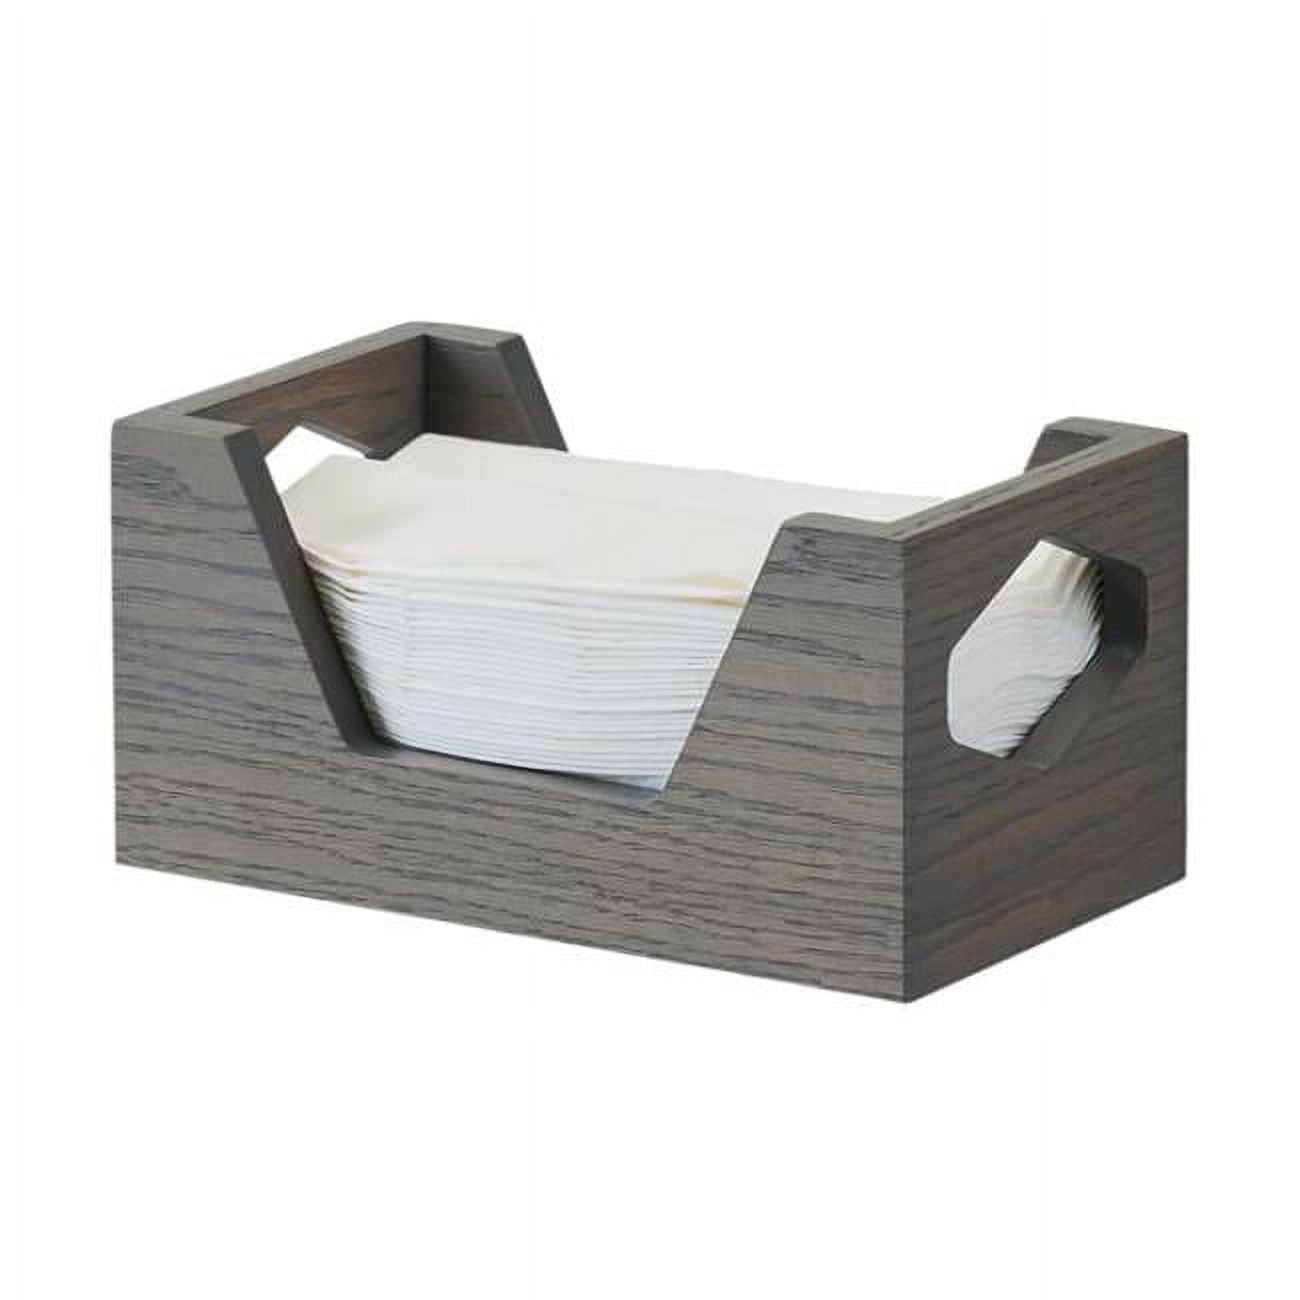 Picture of Cal Mil 3810-83 Ashwood Gray Oak Wood Napkin Holder - 9 x 5 x 4.5 in.